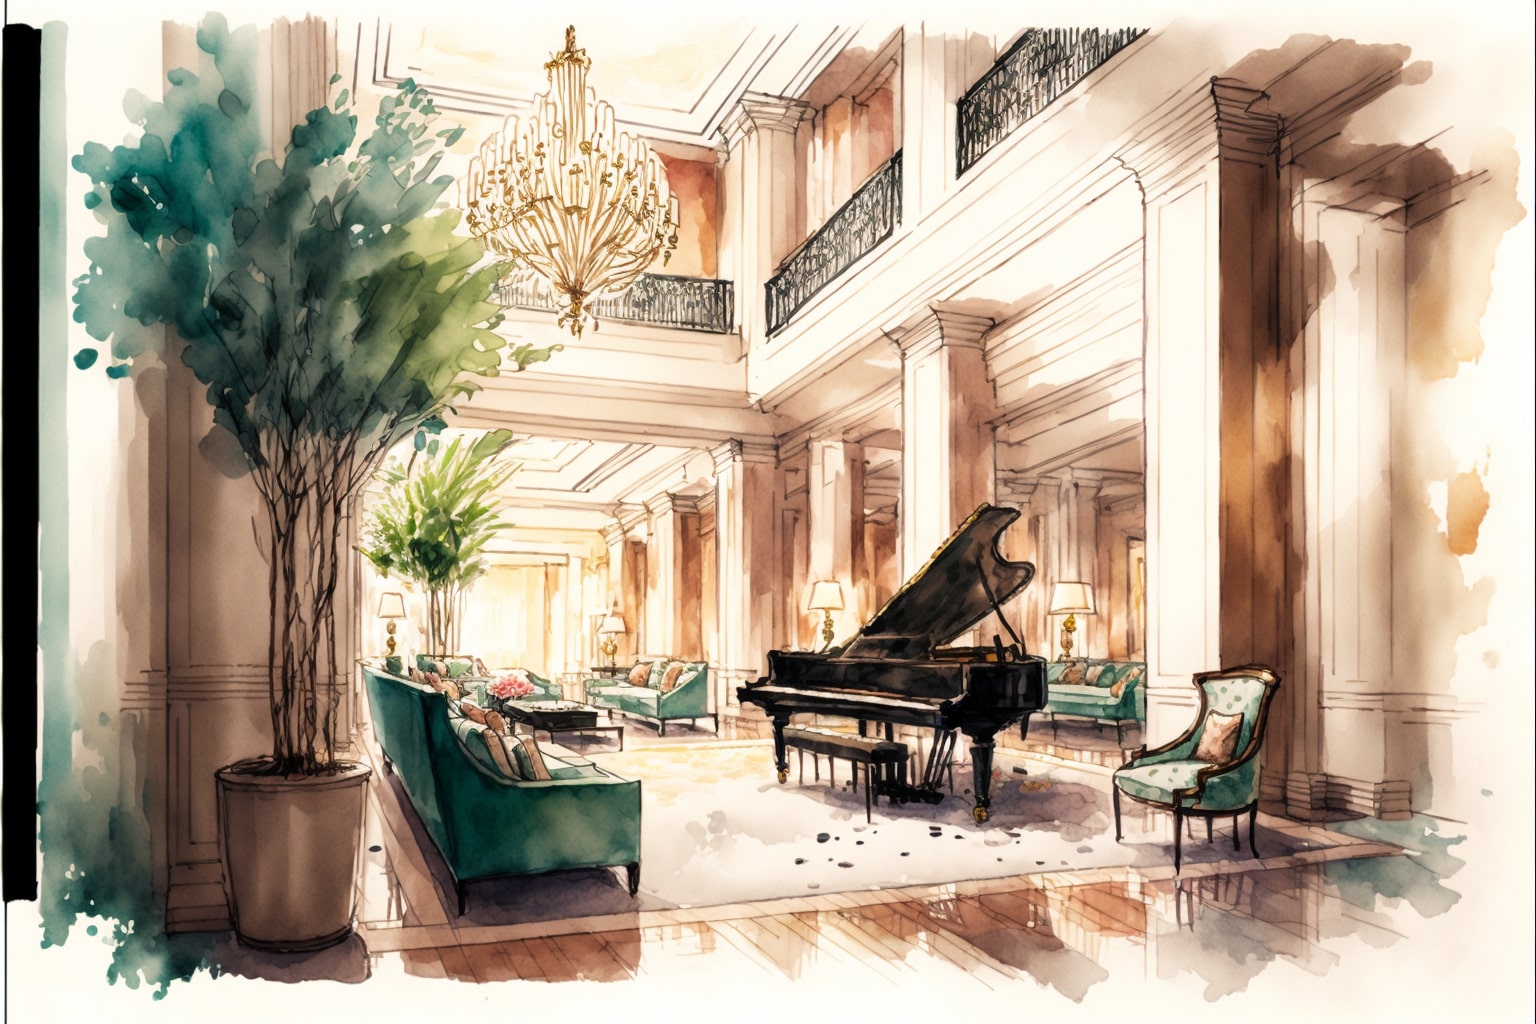 Meridian Chapters Blog 01 - Opulent Hotel Lobby with Grand Piano